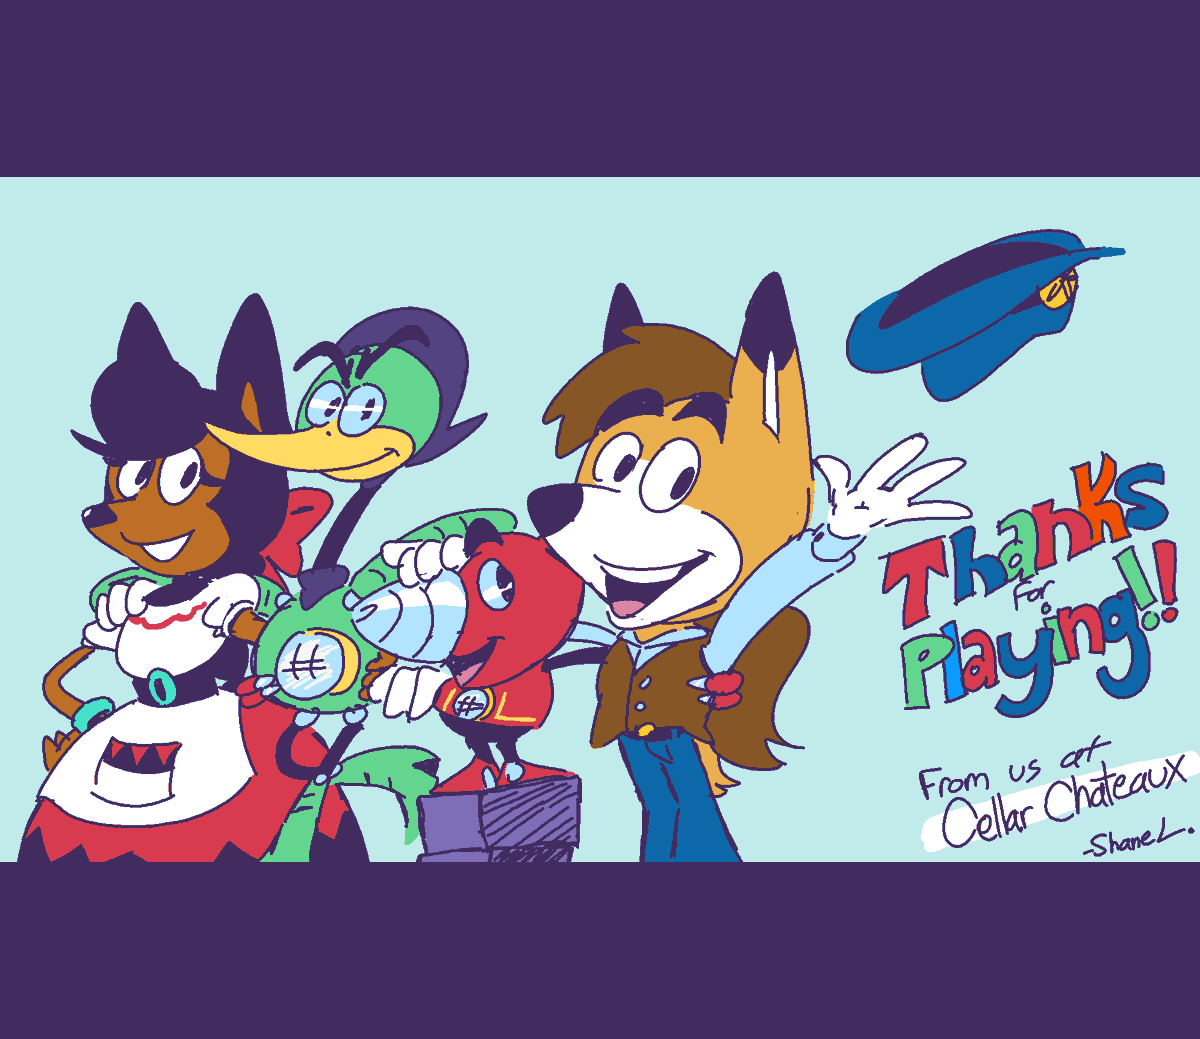 I wanted to make a quick doodle to thank everyone for playing the newest 'Sondro Gomez' demo! As well as thank @SAGExpo for their work, and thank everyone who spoke a good word of Sondro Gomez. The praise means the world to the team and I'm thankful for your support! - Shane